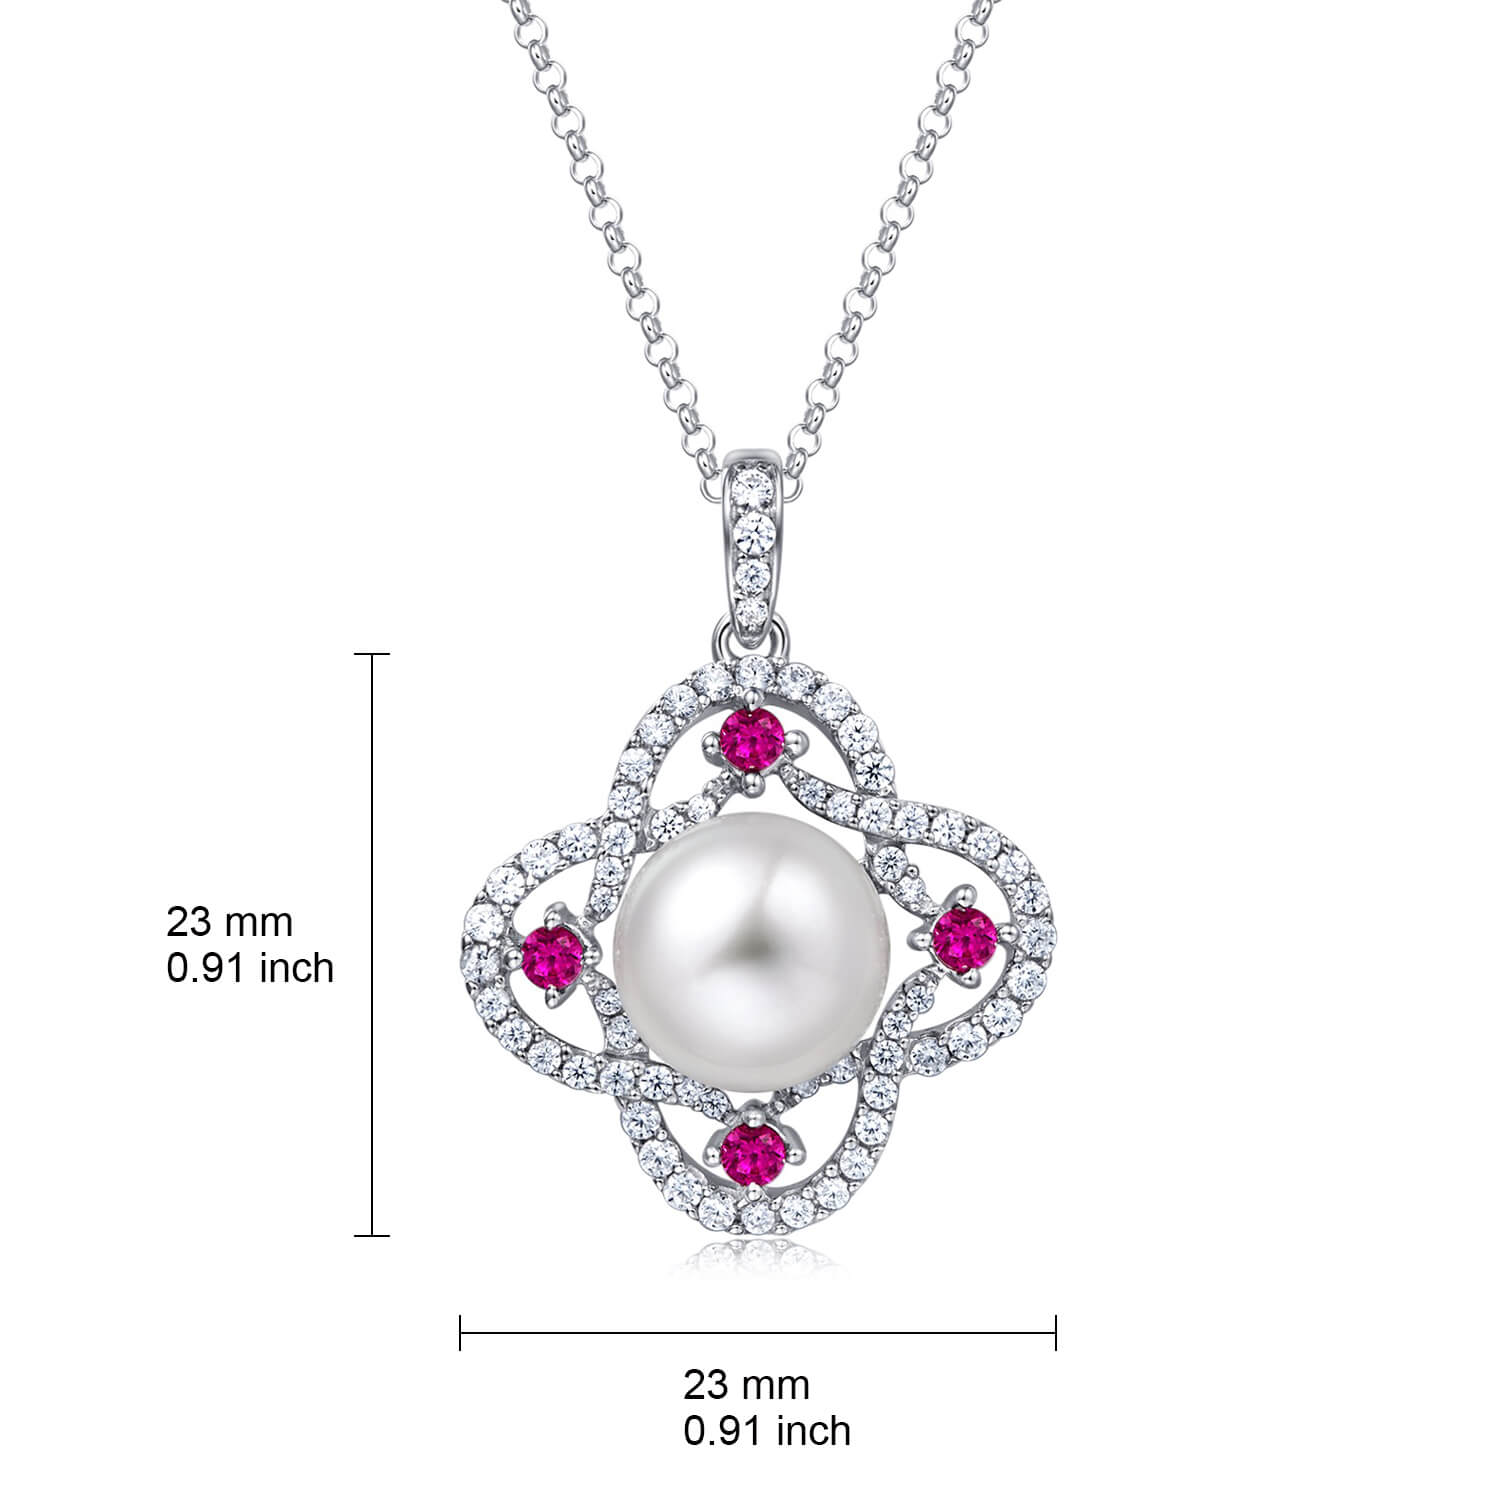 Molah 925 Silver Cultured Freshwater Pearl and Cubic Zirconia Swirl Clover Pendant Necklace